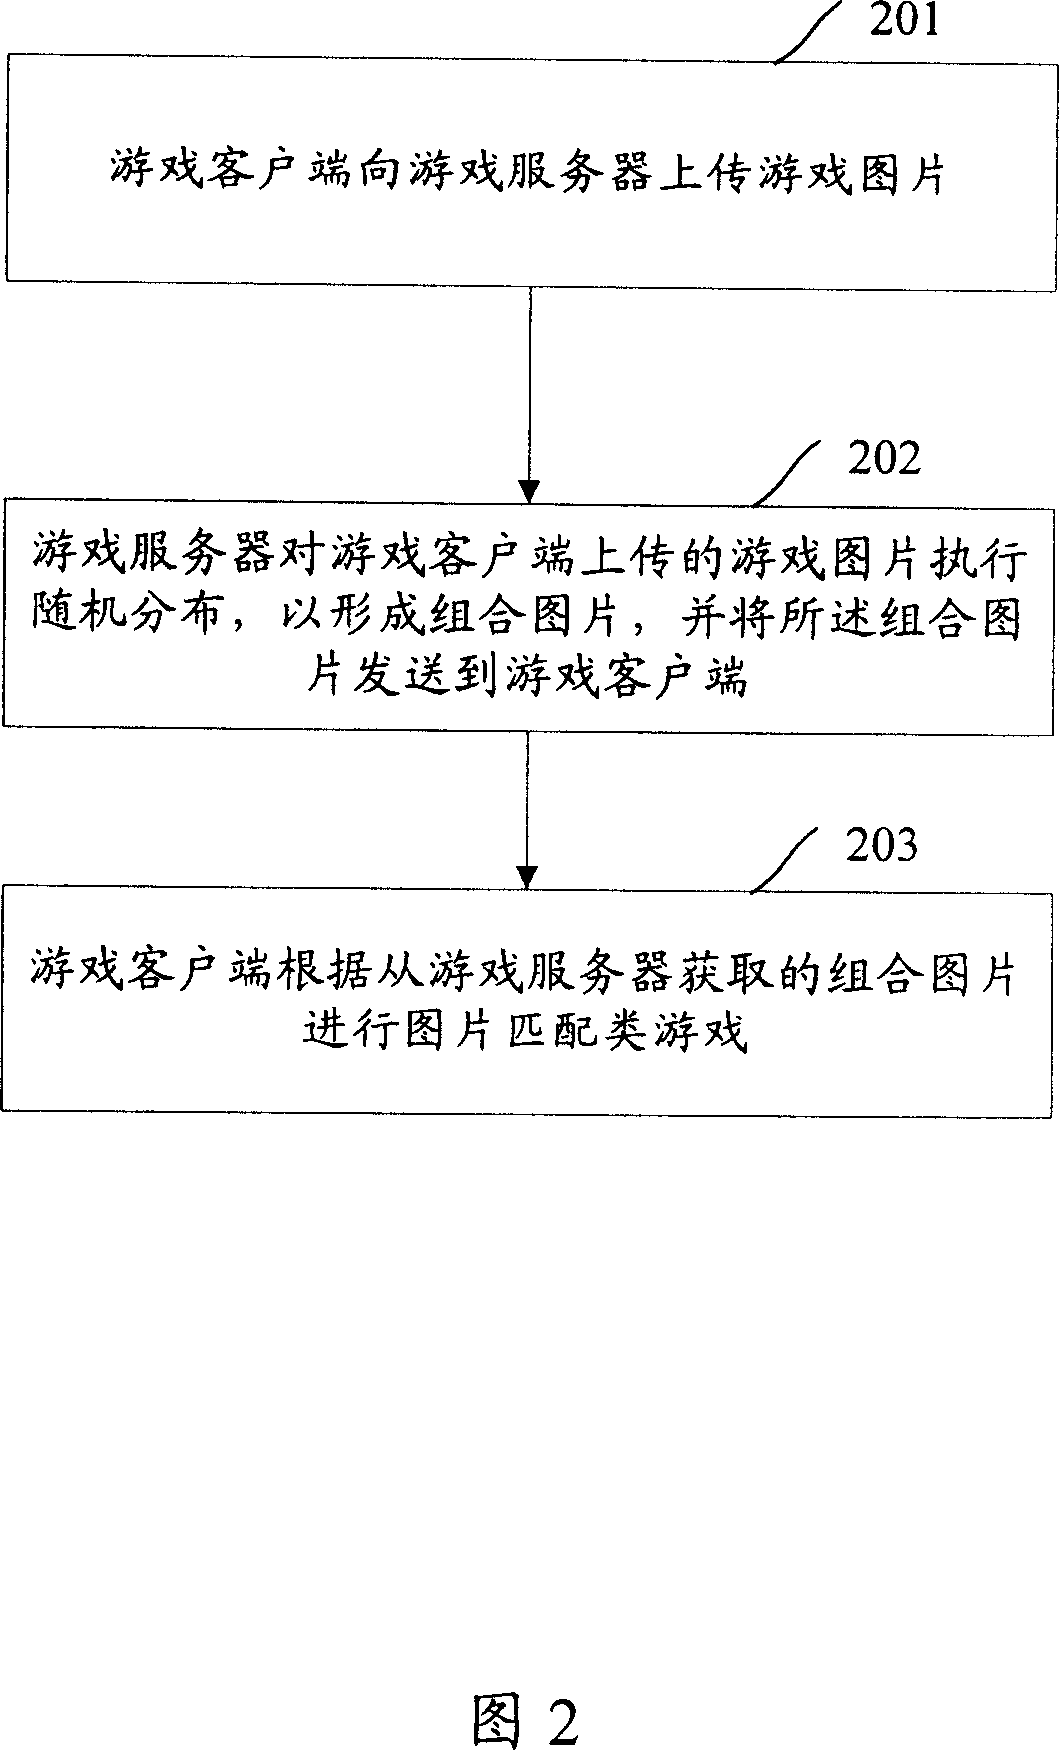 Picture matching game processing system and processing method